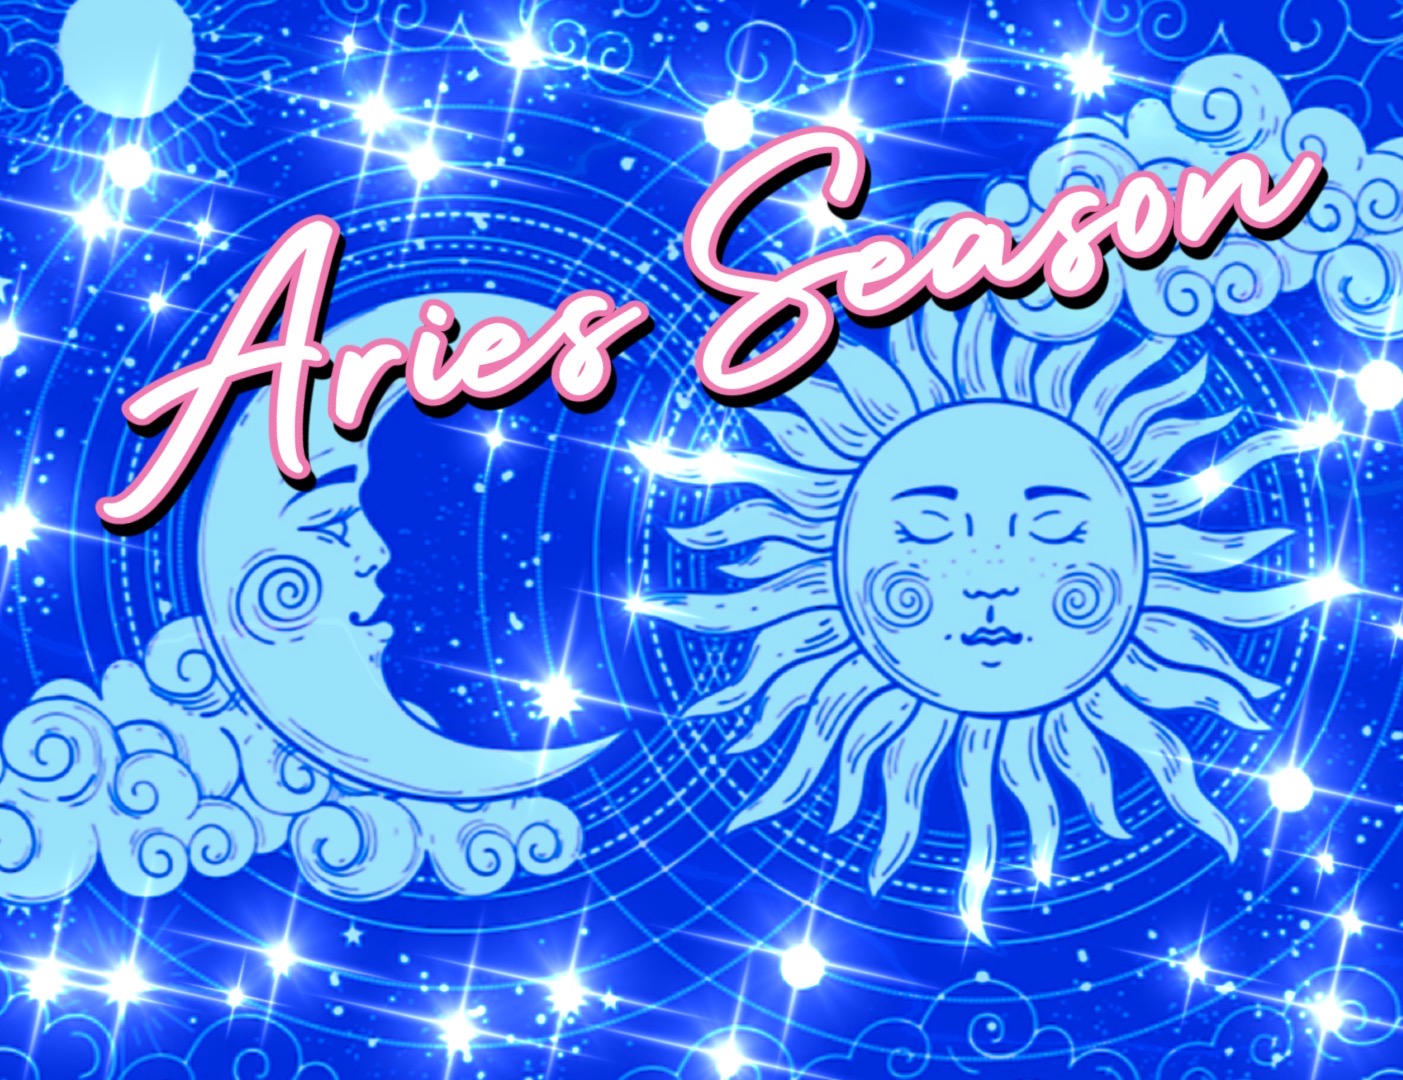 Your Aries Season Candle Horoscope